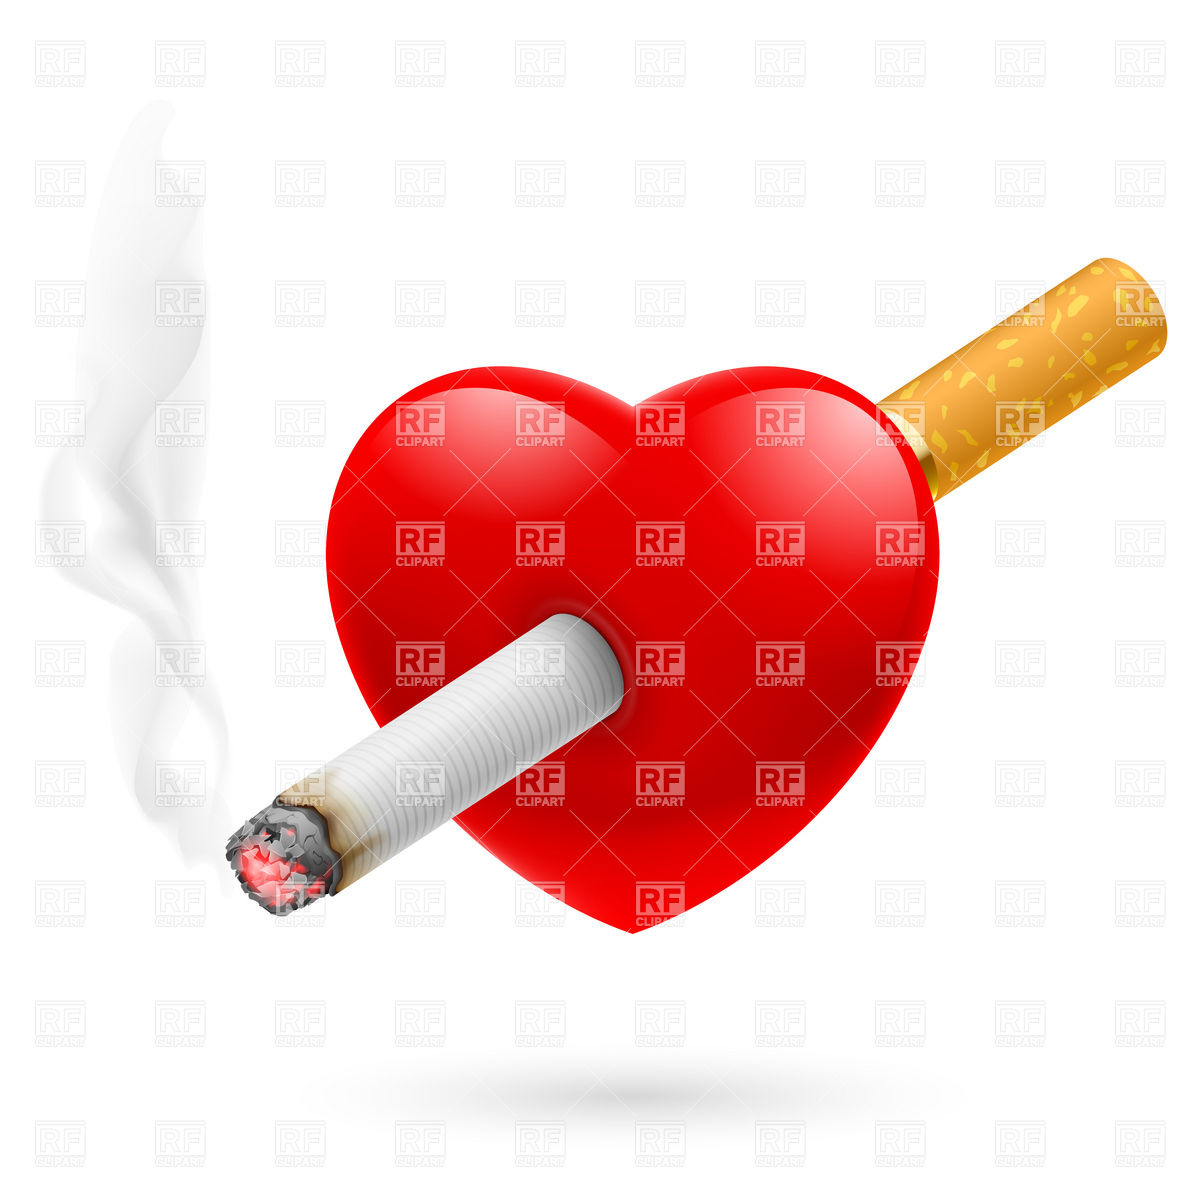 Smoking Kills   Heart Pierced Through By Cigarette Download Royalty